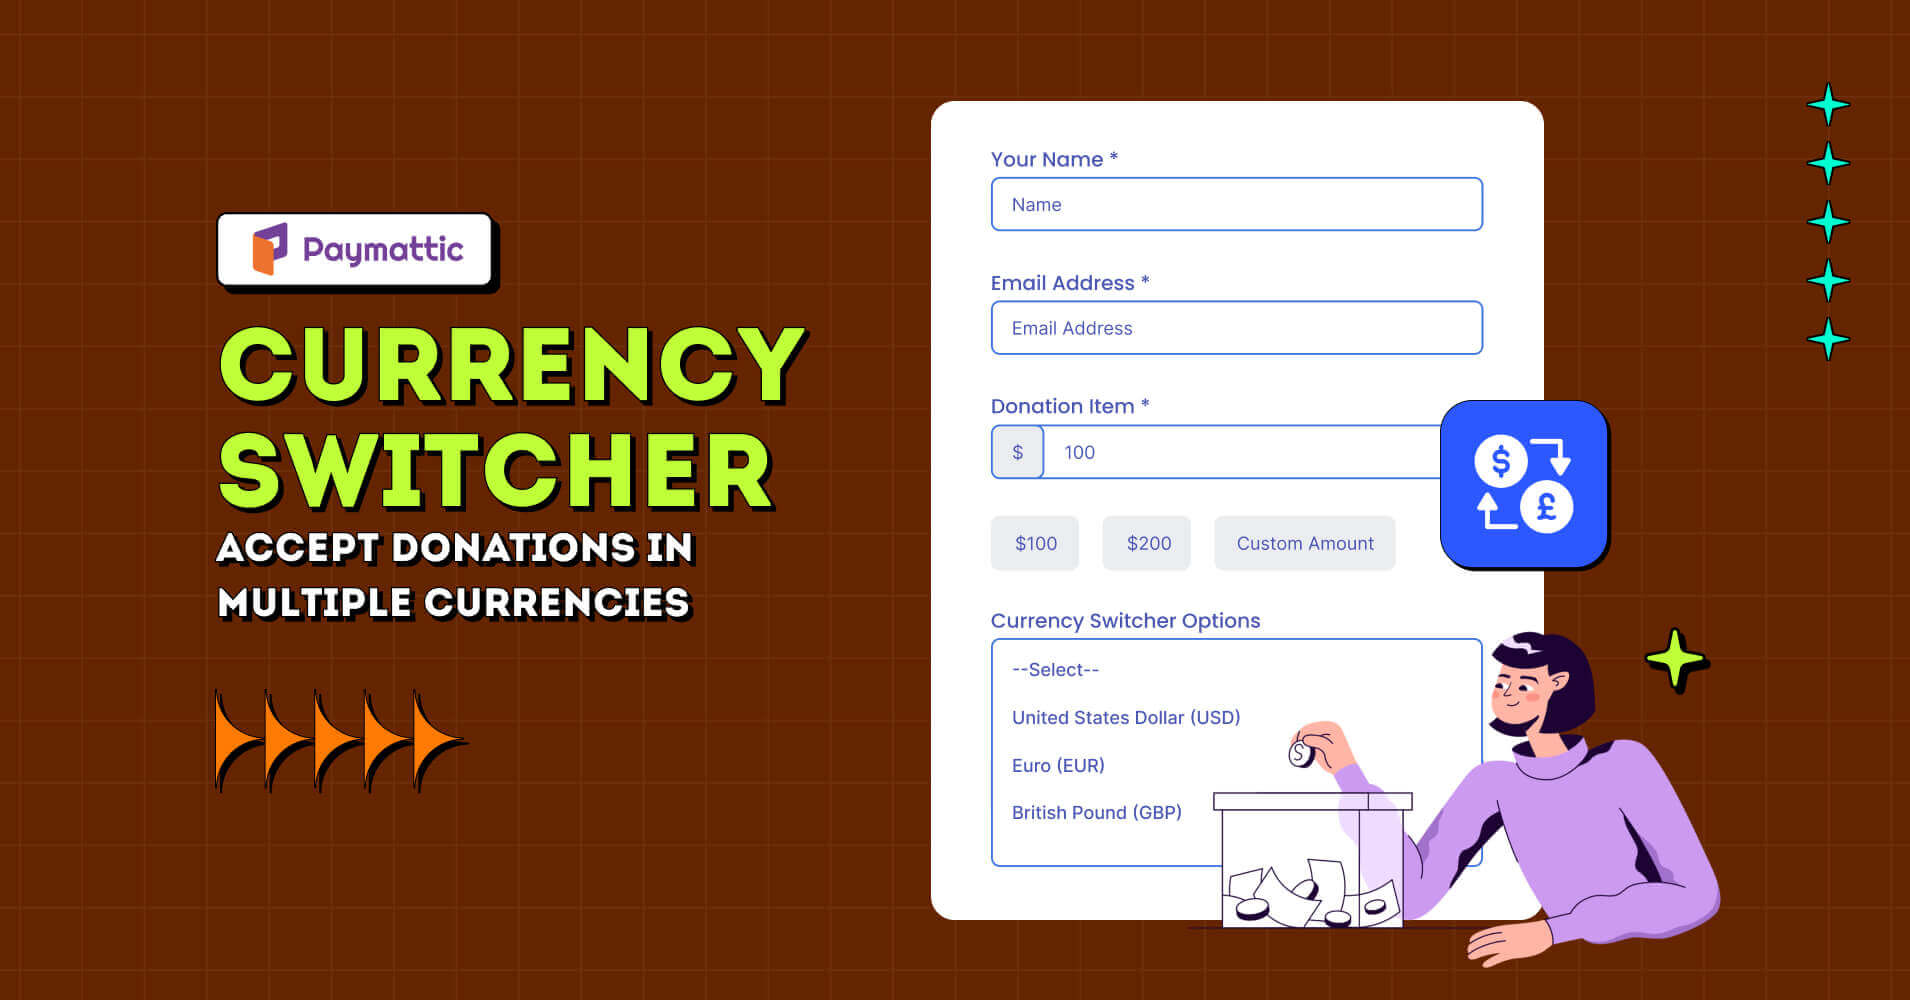 Paymattic Currency Switcher_ Accept Donations in Multiple Currencies